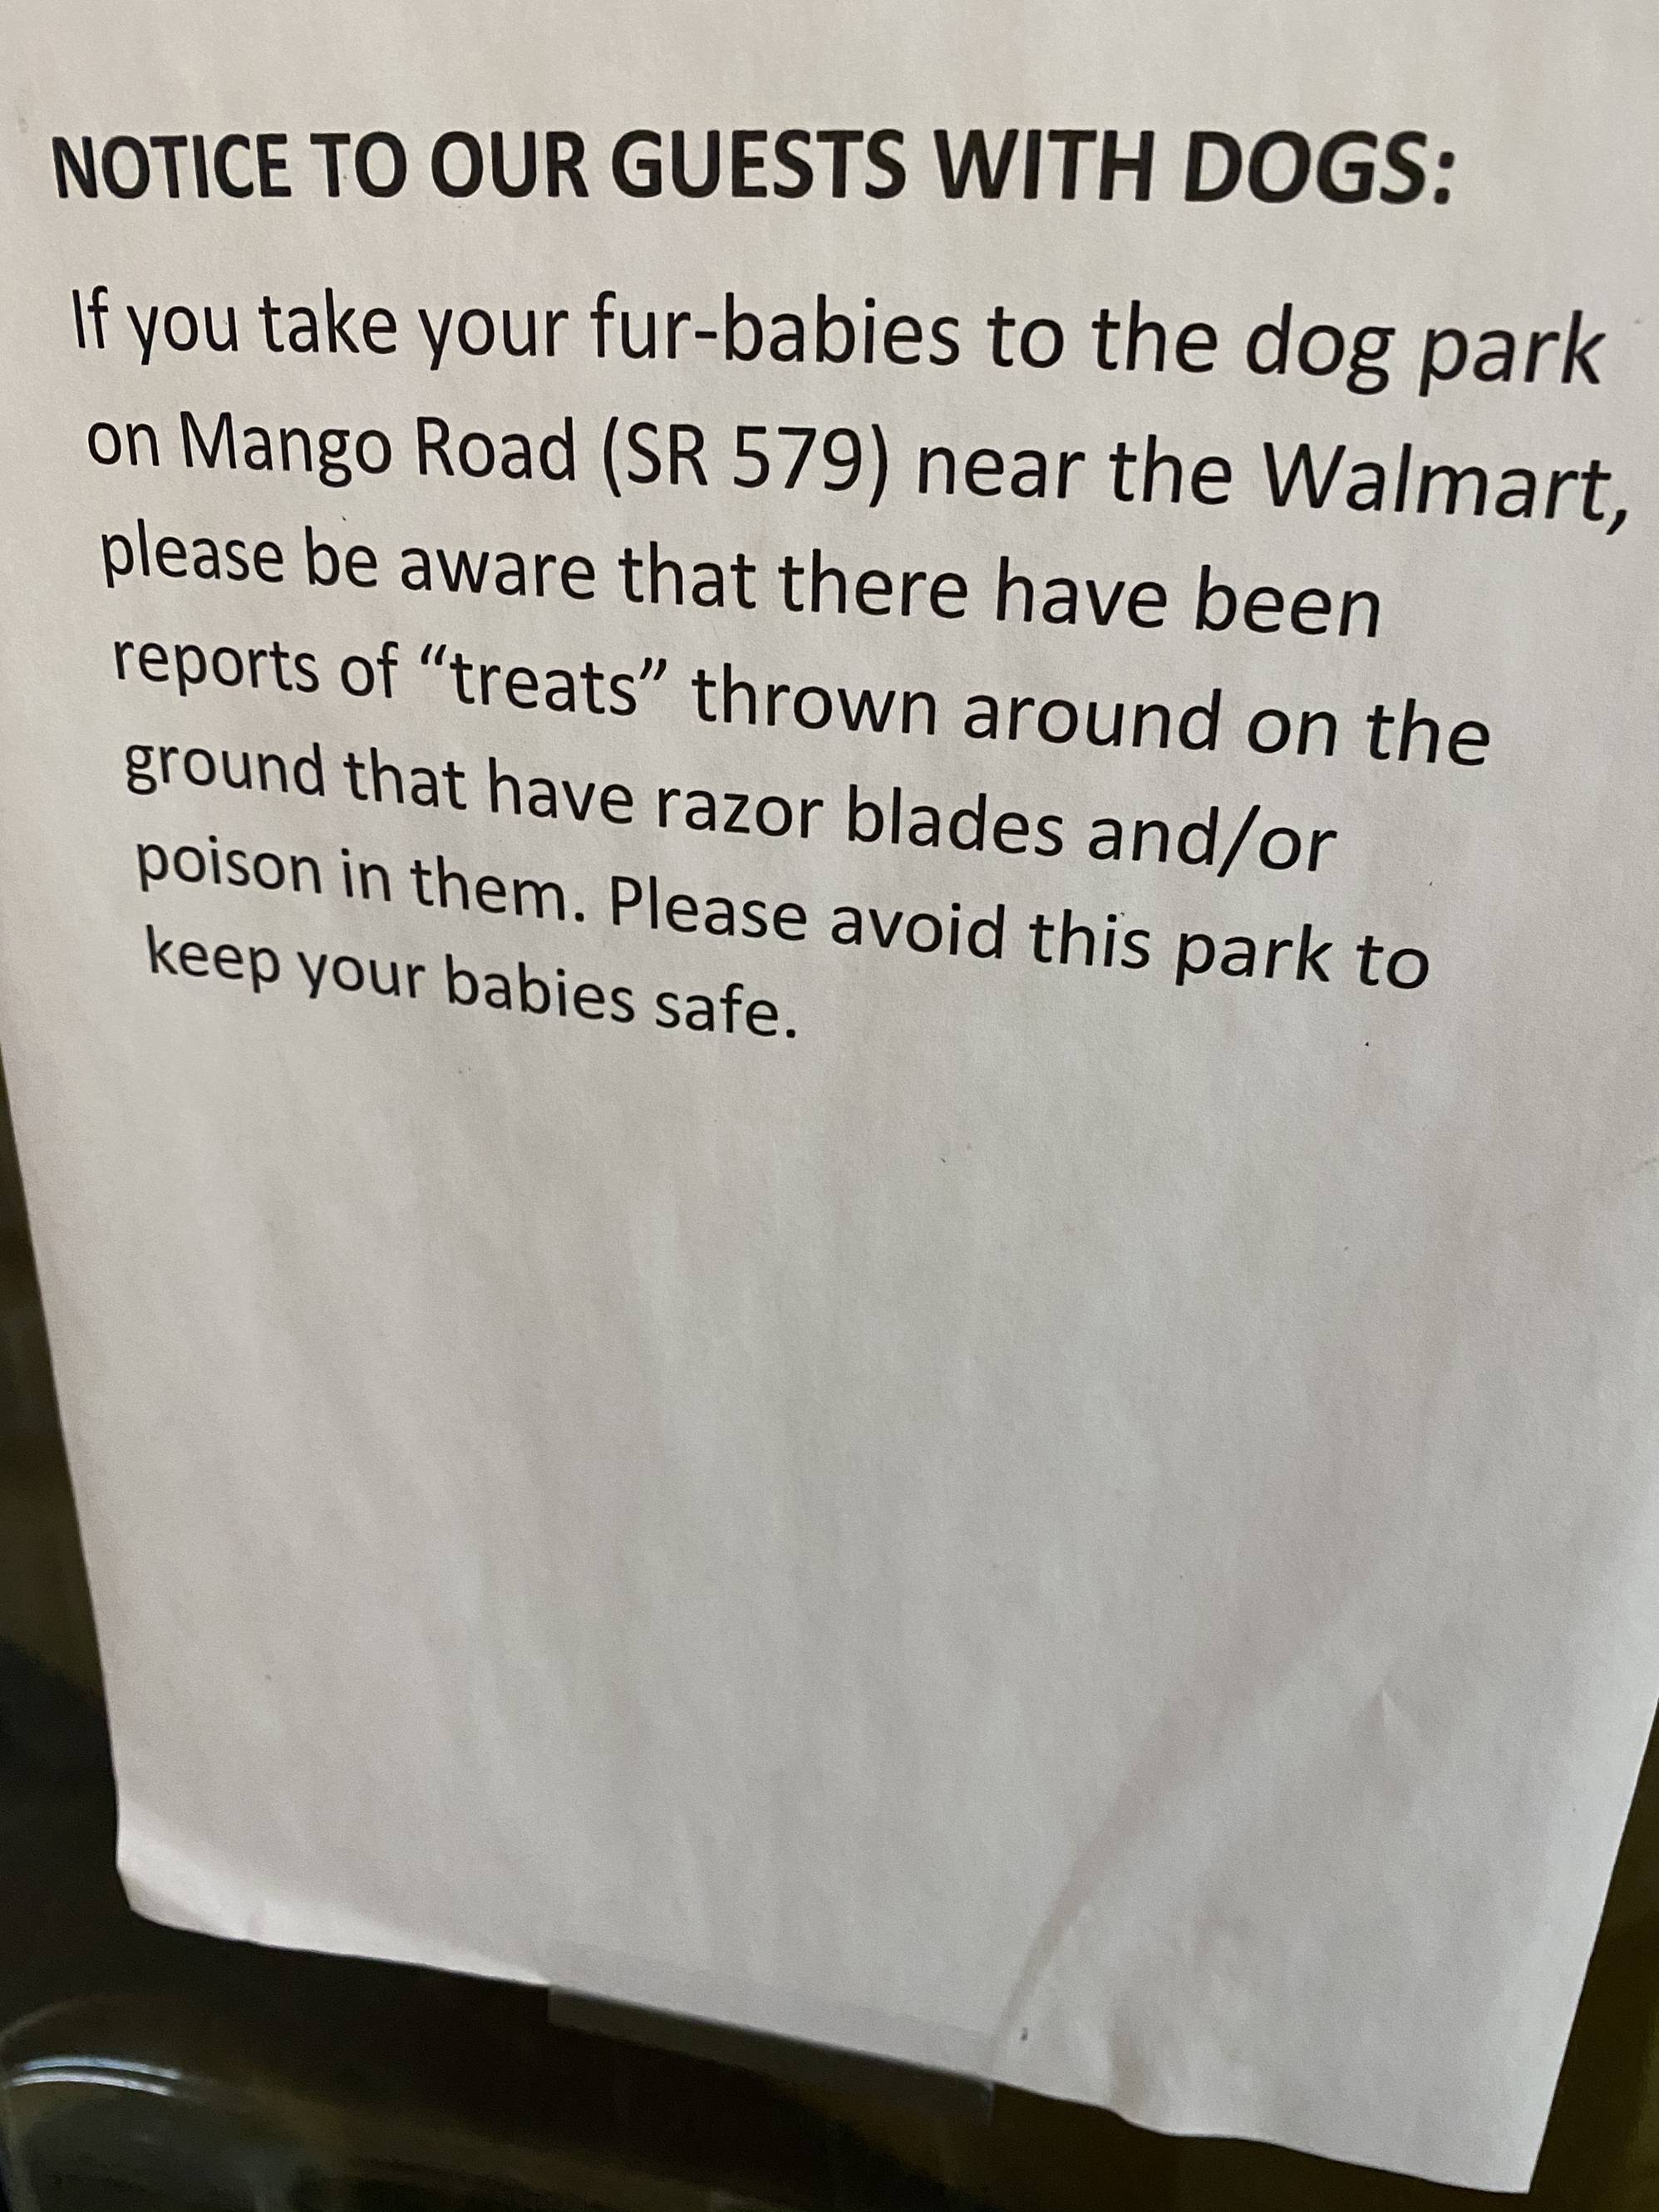 paper - Notice To Our Guests With Dogs If you take your furbabies to the dog park on Mango Road Sr 579 near the Walmart, please be aware that there have been reports of